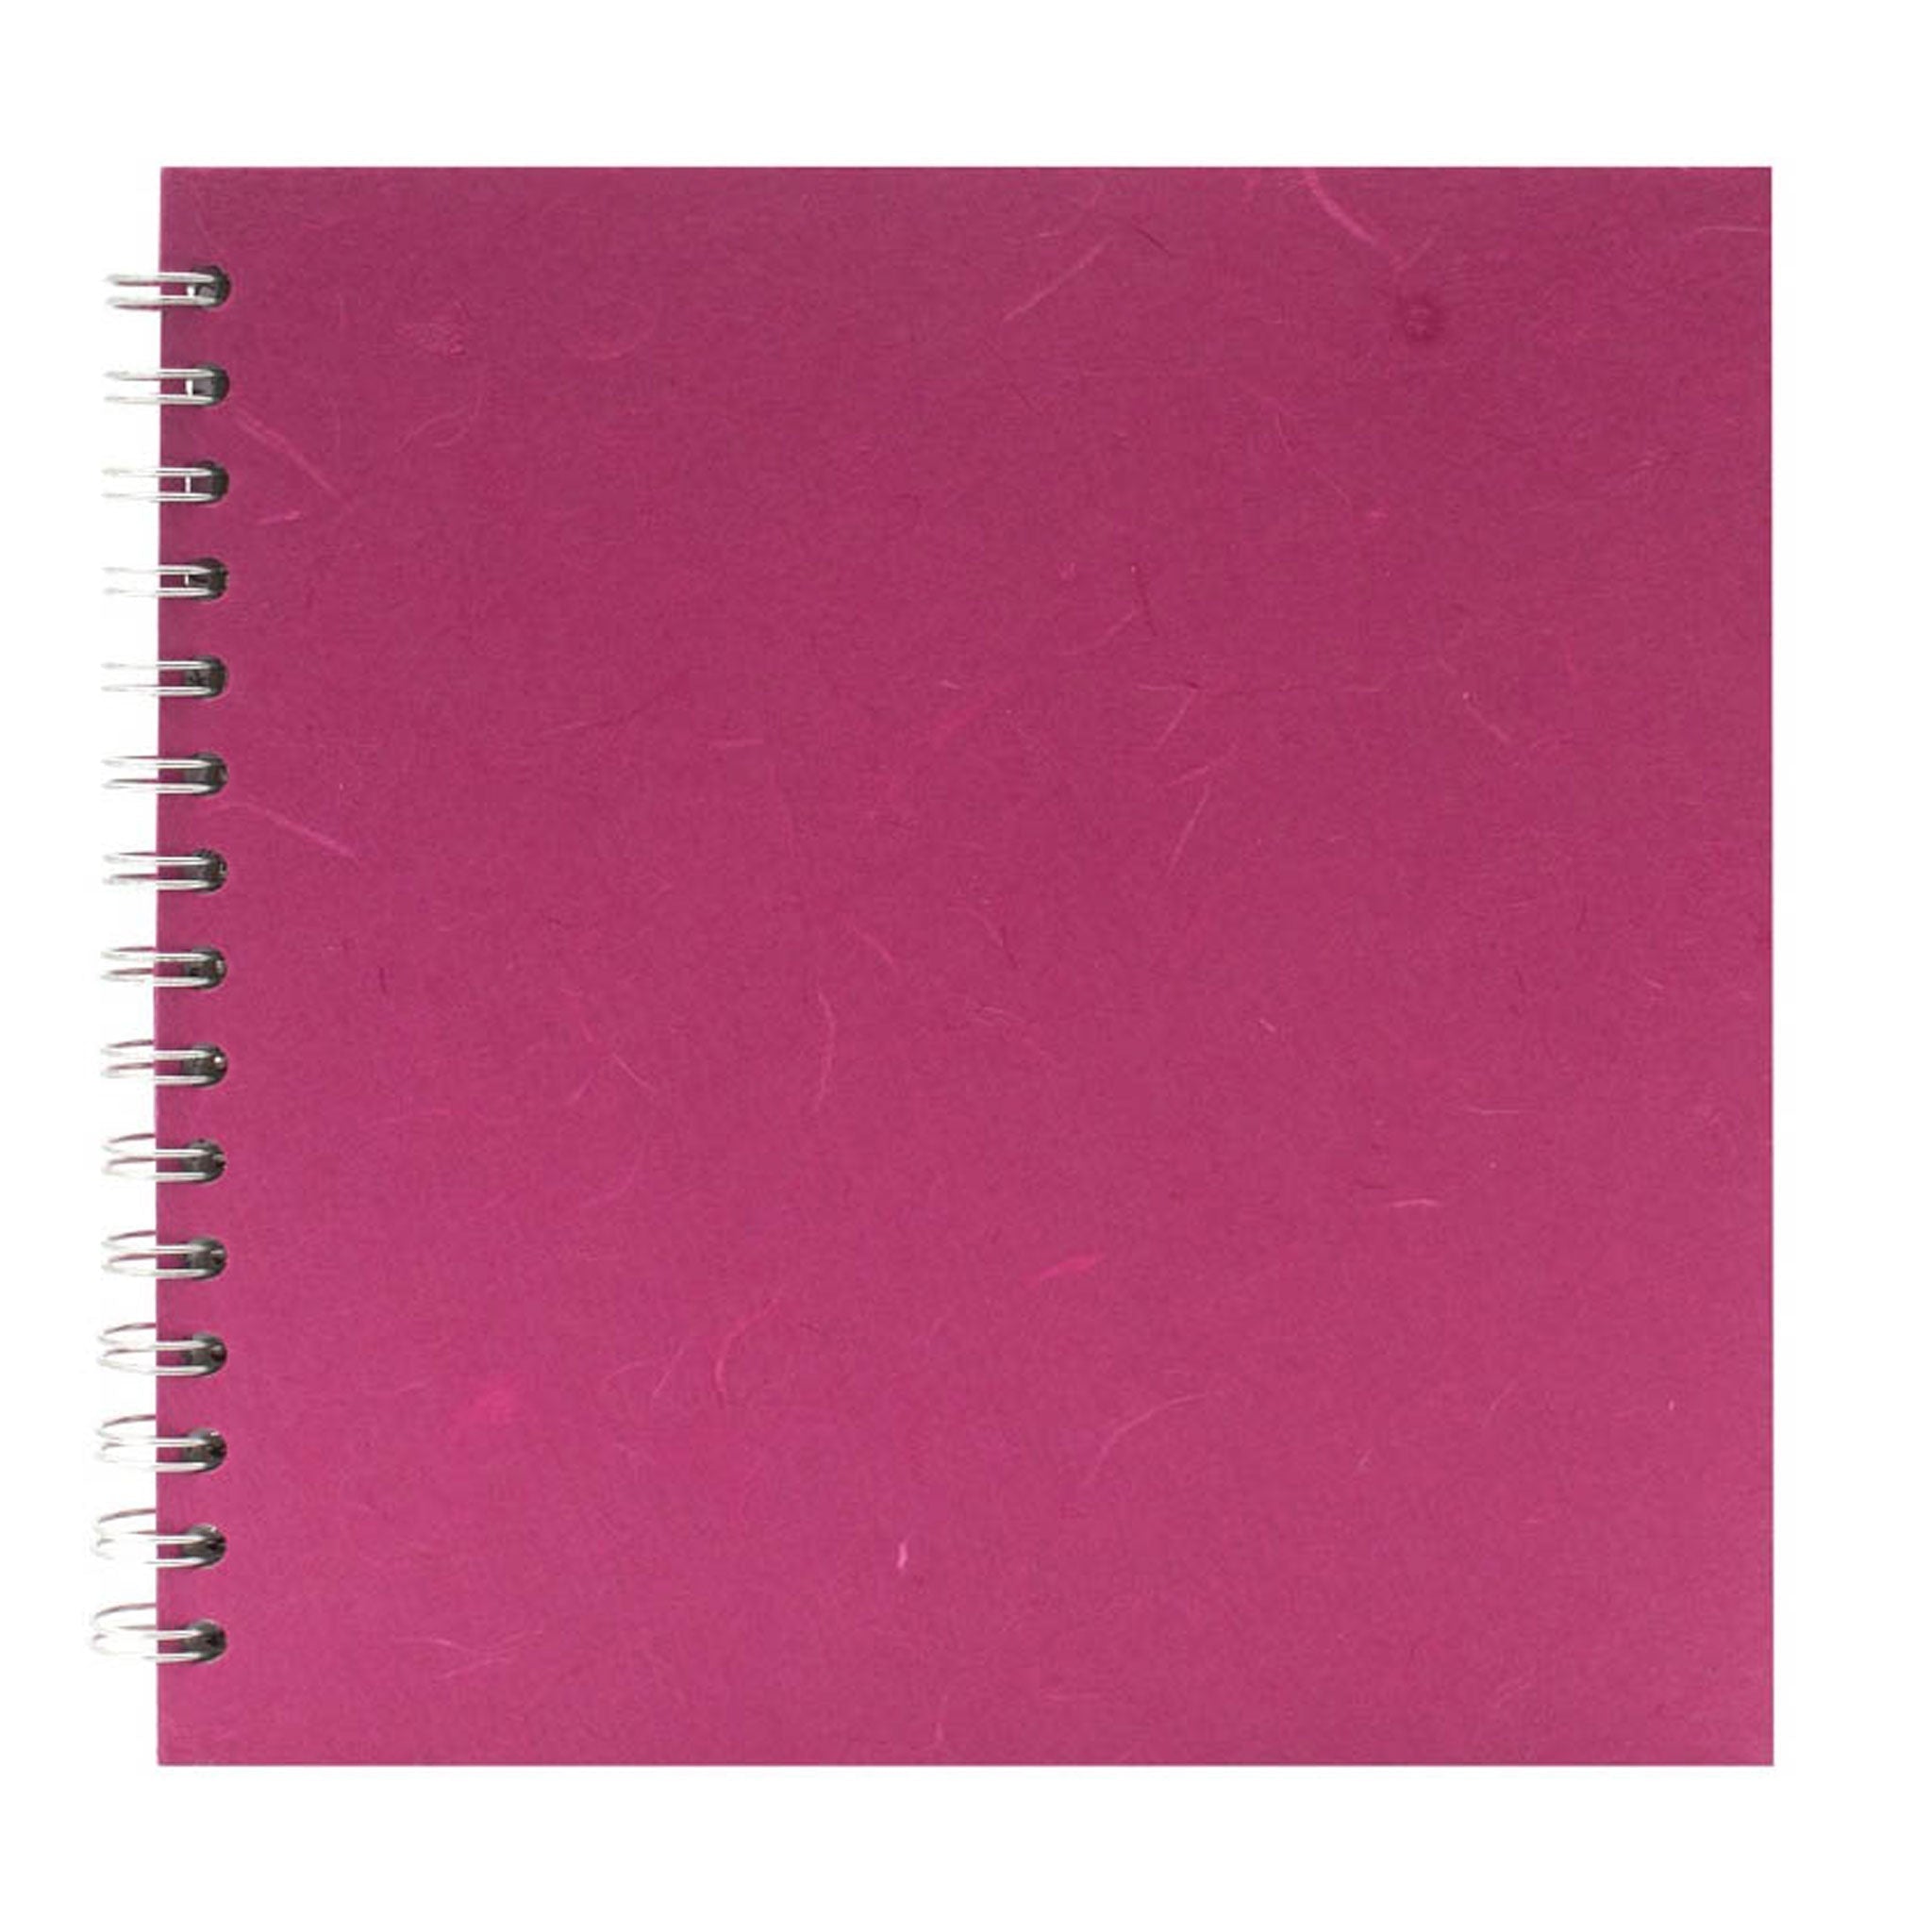 Pink Pig Square 11 x 11 Inch Sketchbook: 35 Pages, 150 gsm